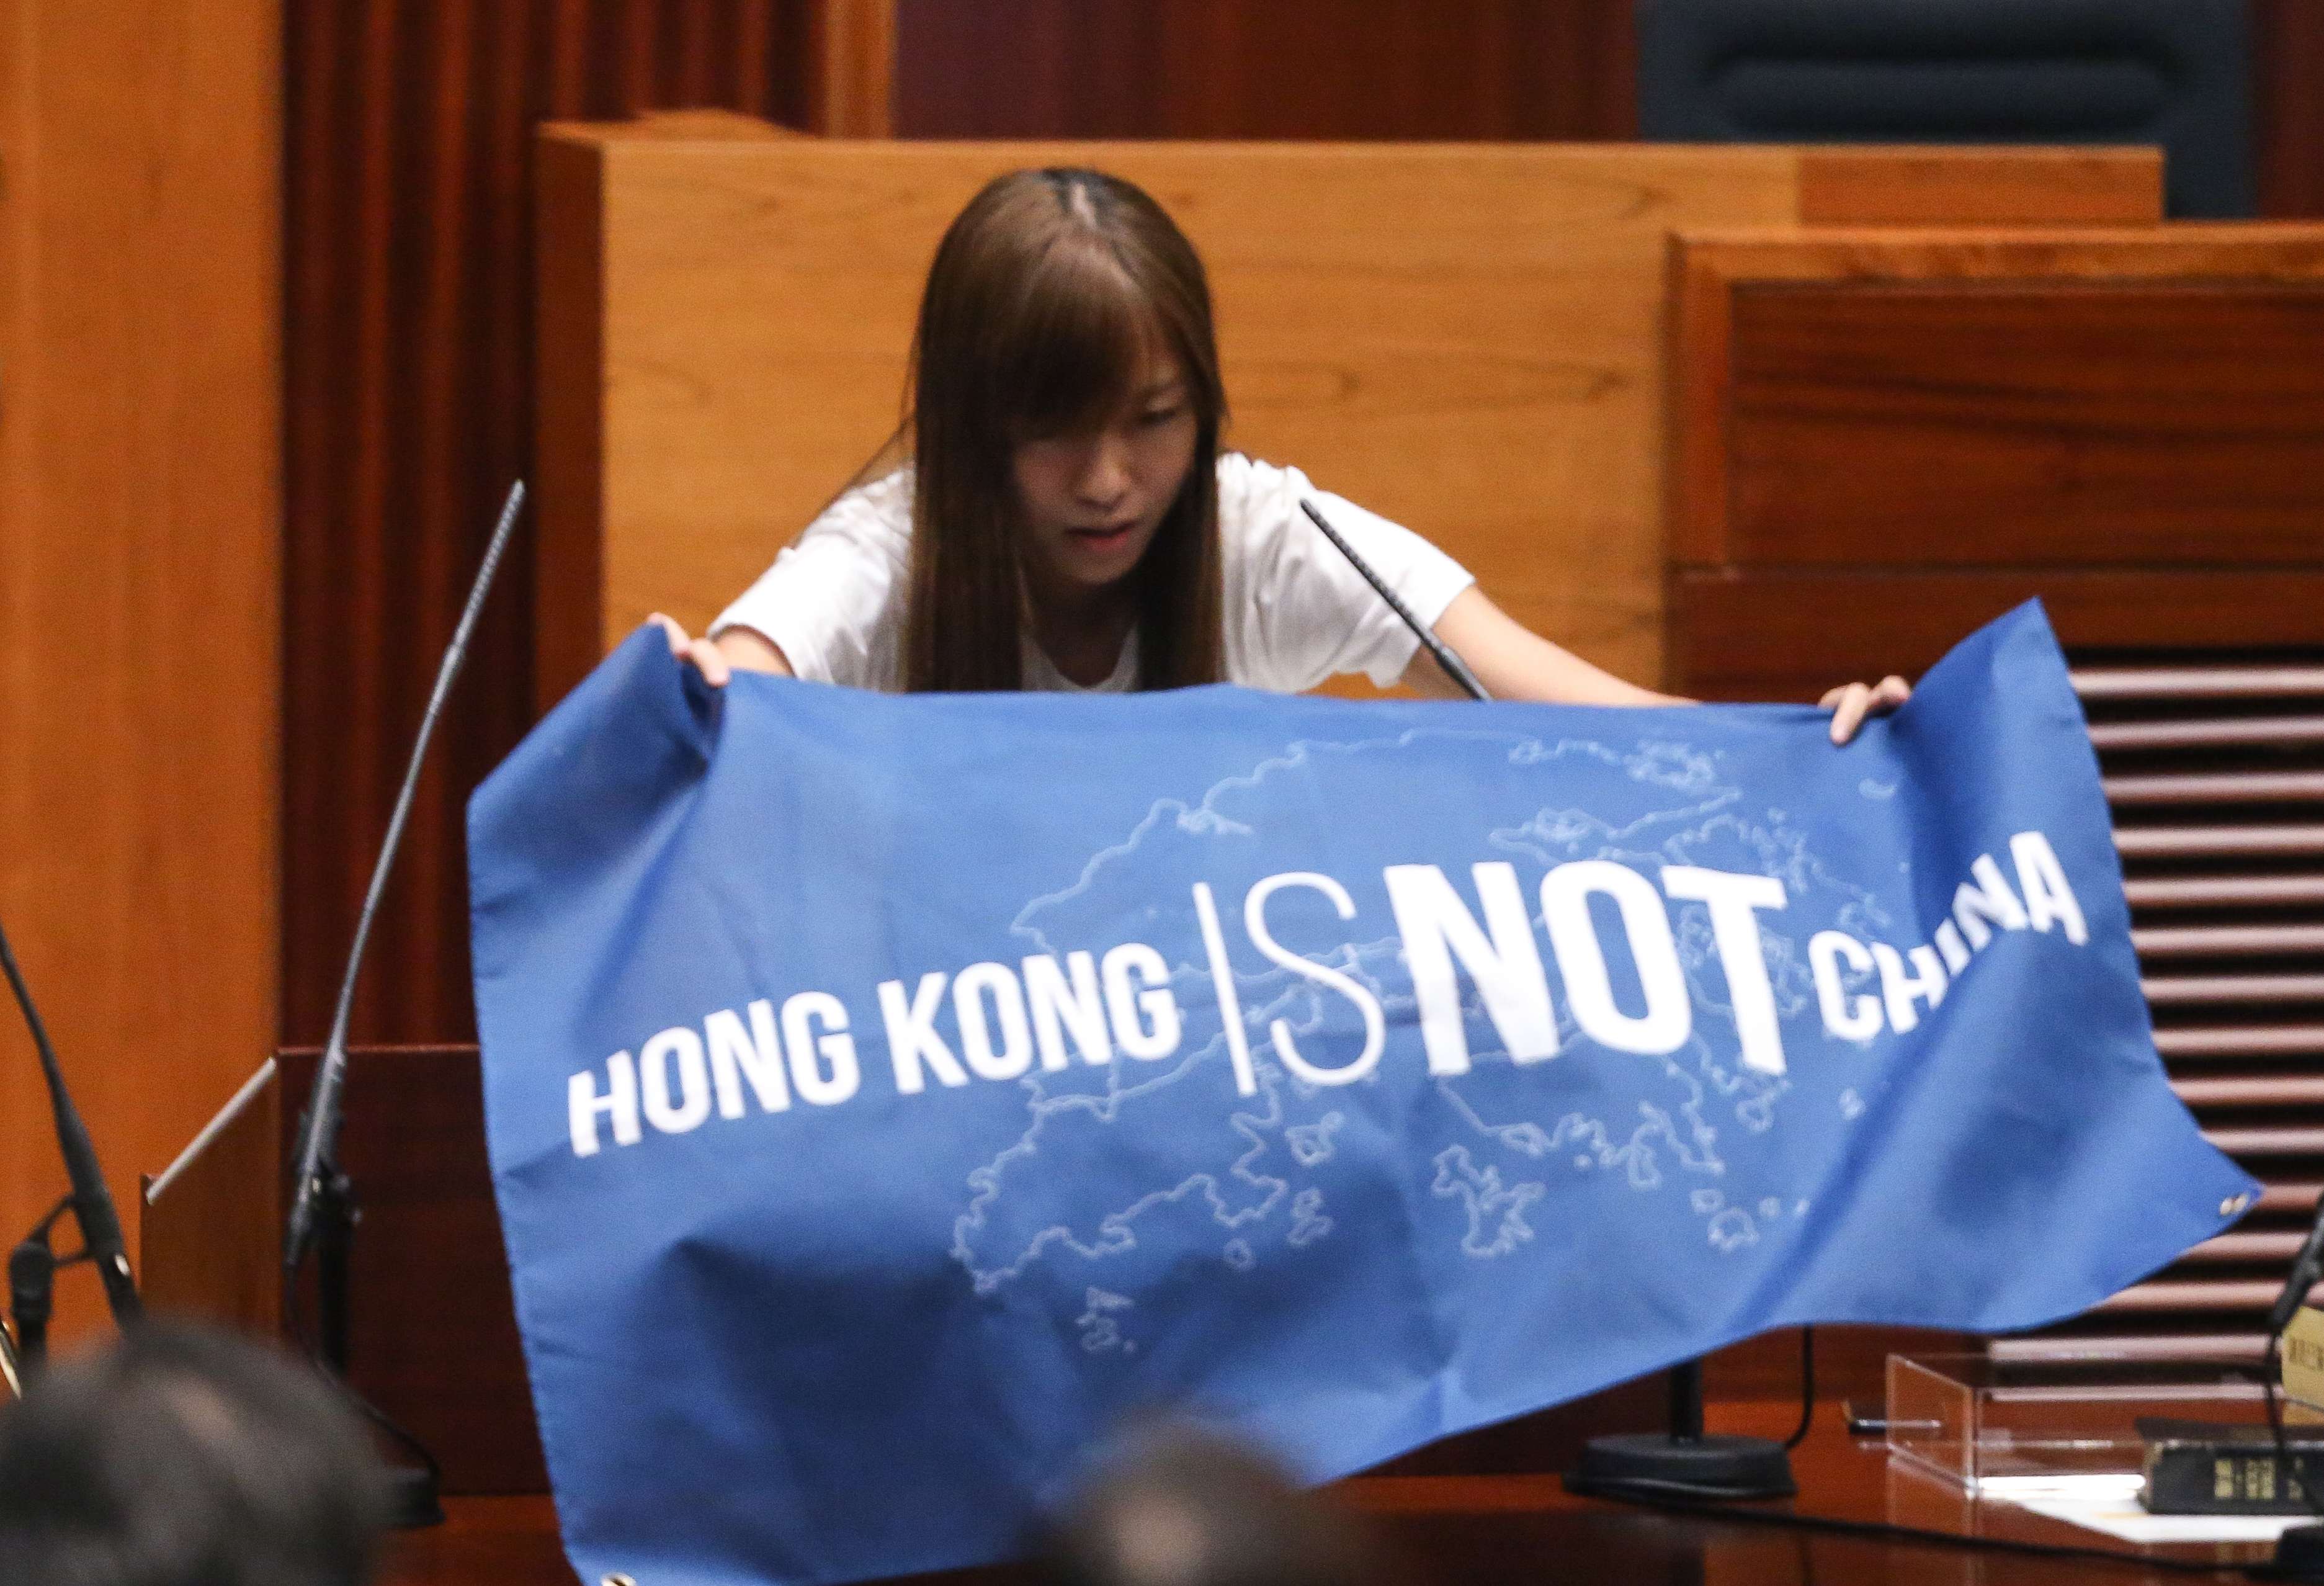 Yau Wai-ching displays a banner during her oath-taking last week. It is aggrieving that young localists could stoop so low as to refer to China as “Cheena”, a variation of the derogatory term “Shina” once used by the Japanese. Photo: Sam Tsang